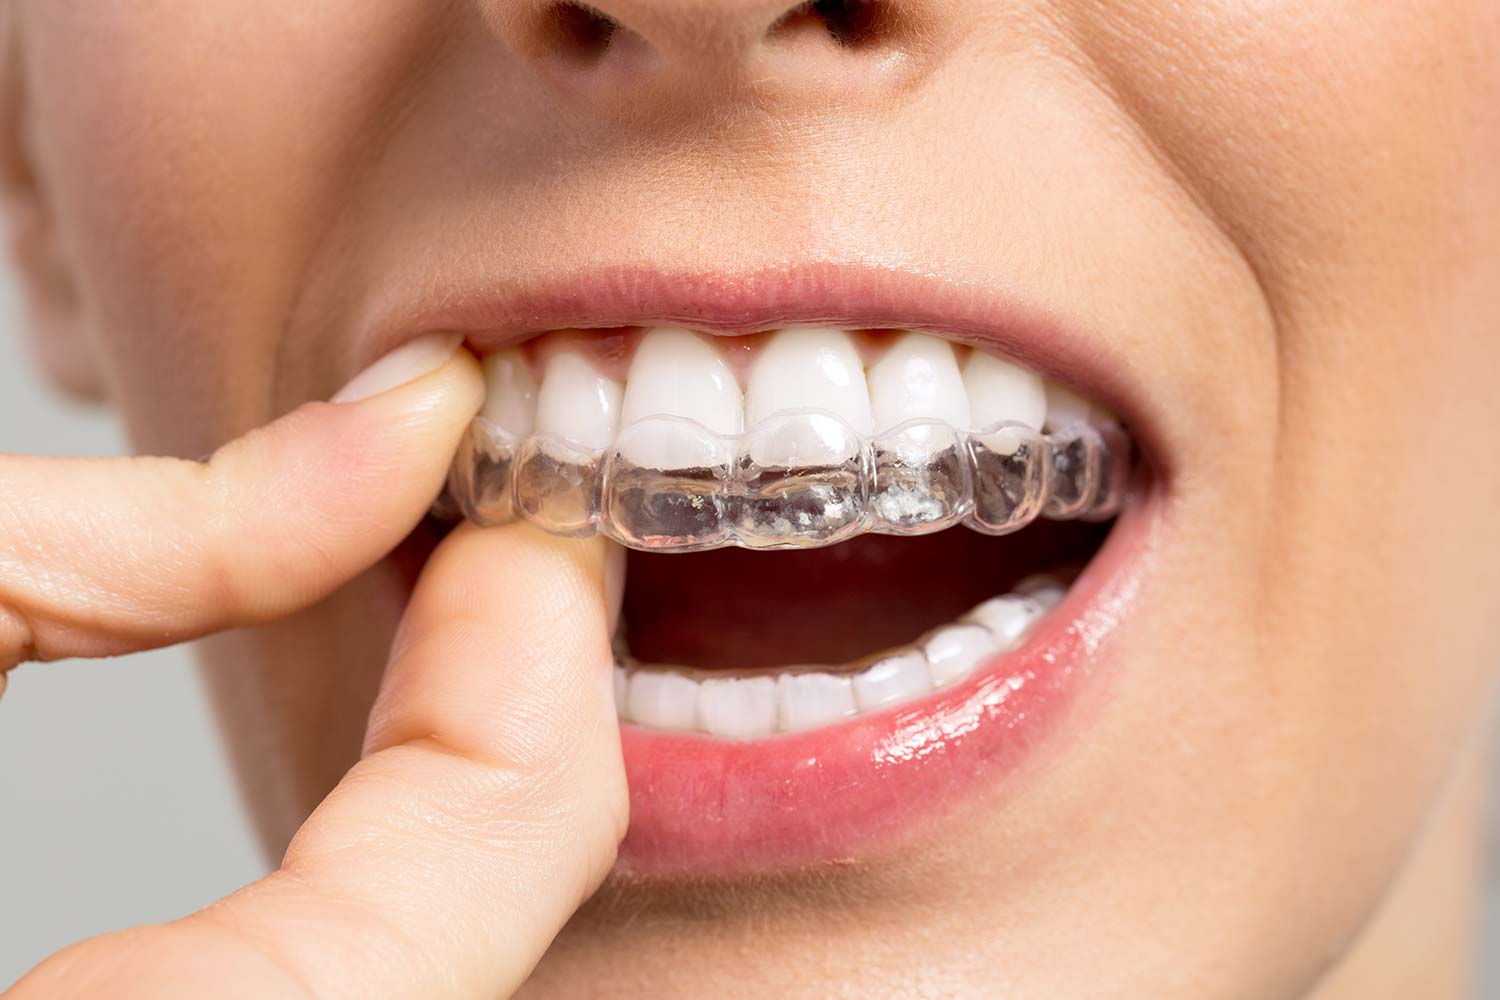 Woman putting orthodontic clear braces on her teeth